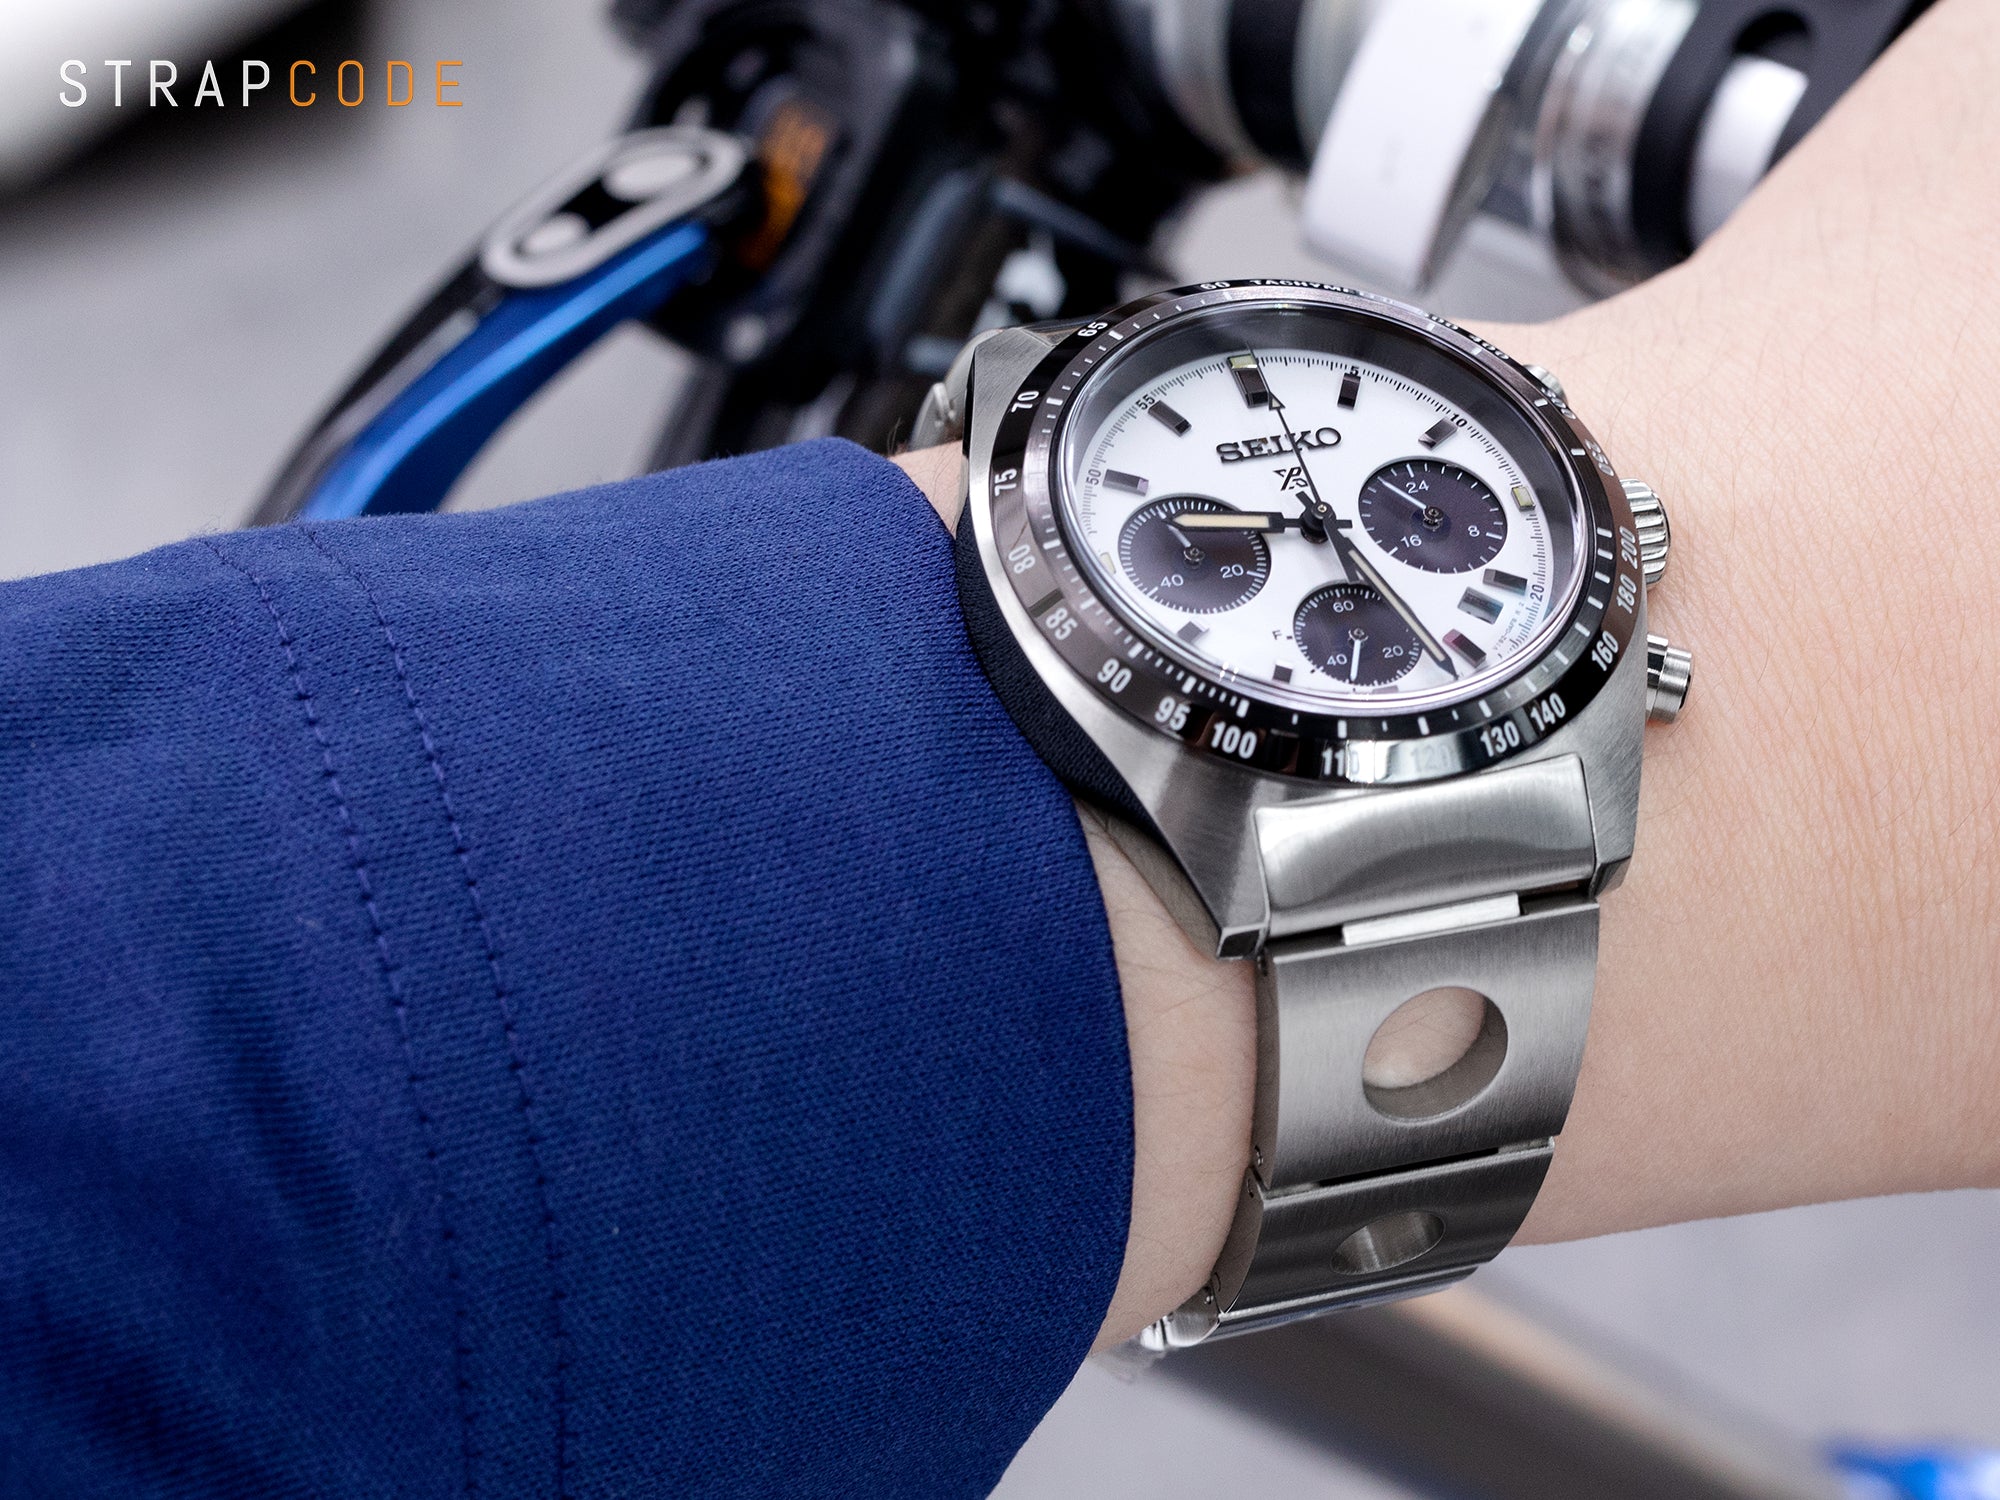 Travel with your watch Seiko Speedtimer Panda chronograph SSC813 by Strapcode watch bands